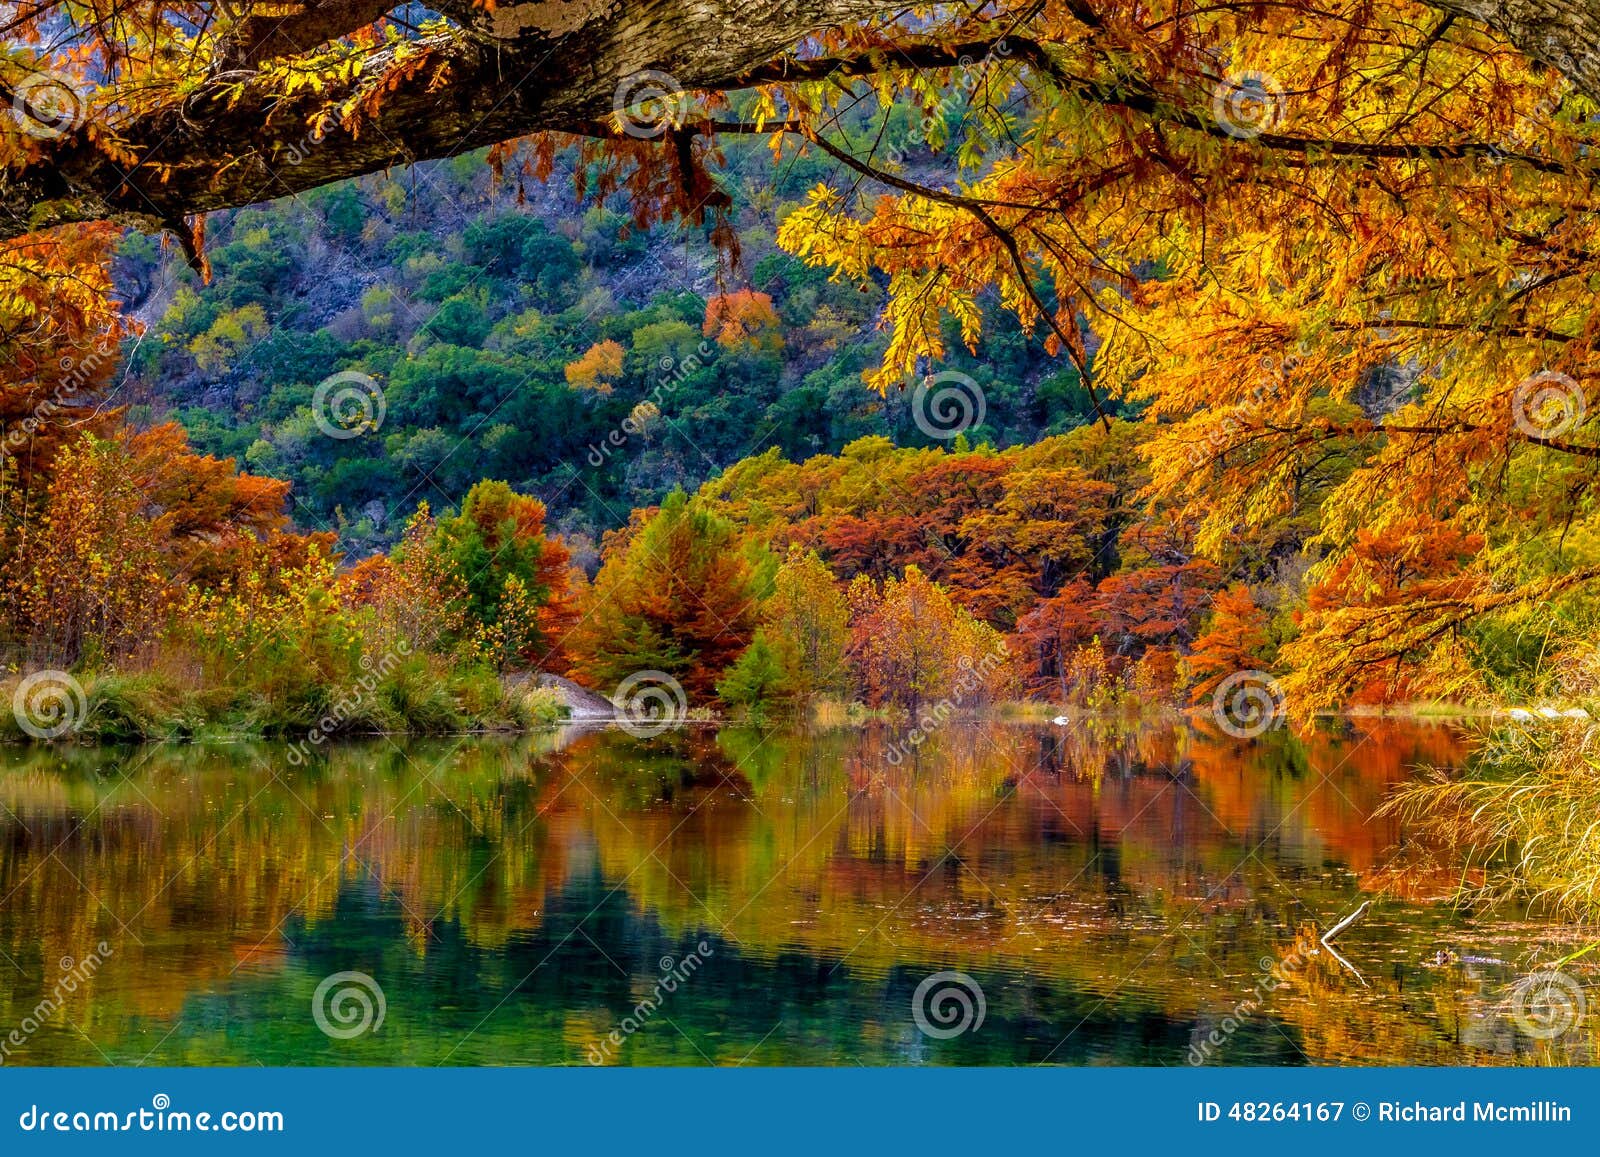 fiery orange reflections on the frio river at garner state park, texas